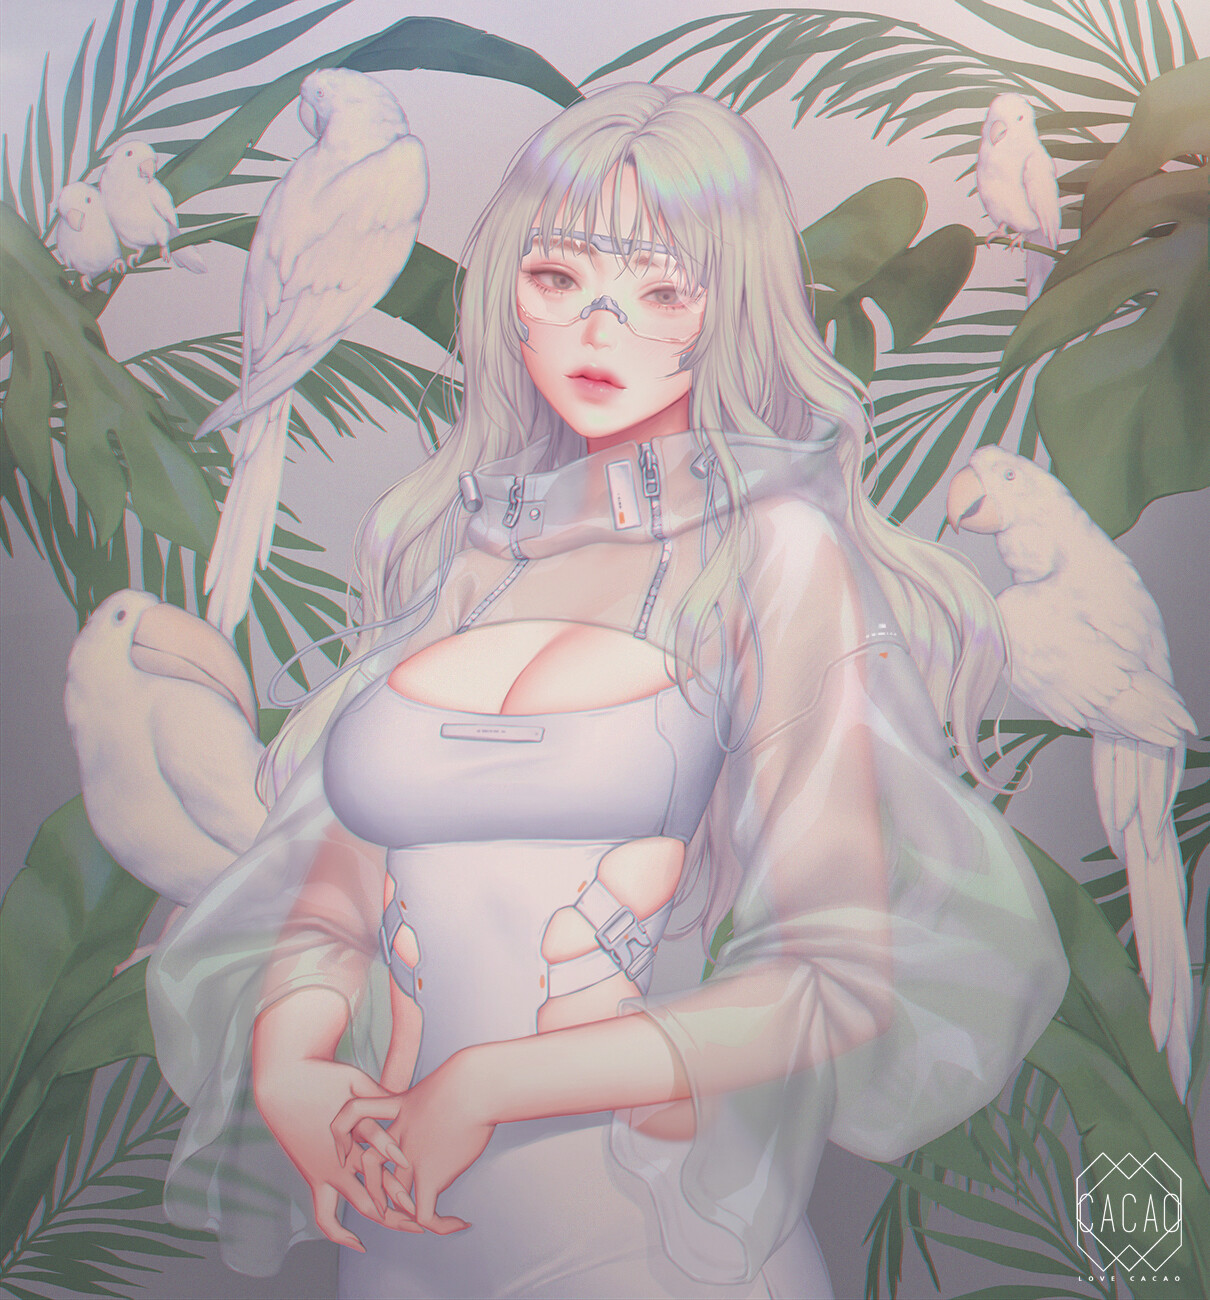 Anime 1210x1300 Lovecacao drawing women silver hair long hair wavy hair glasses dress white clothing leaves birds parrot